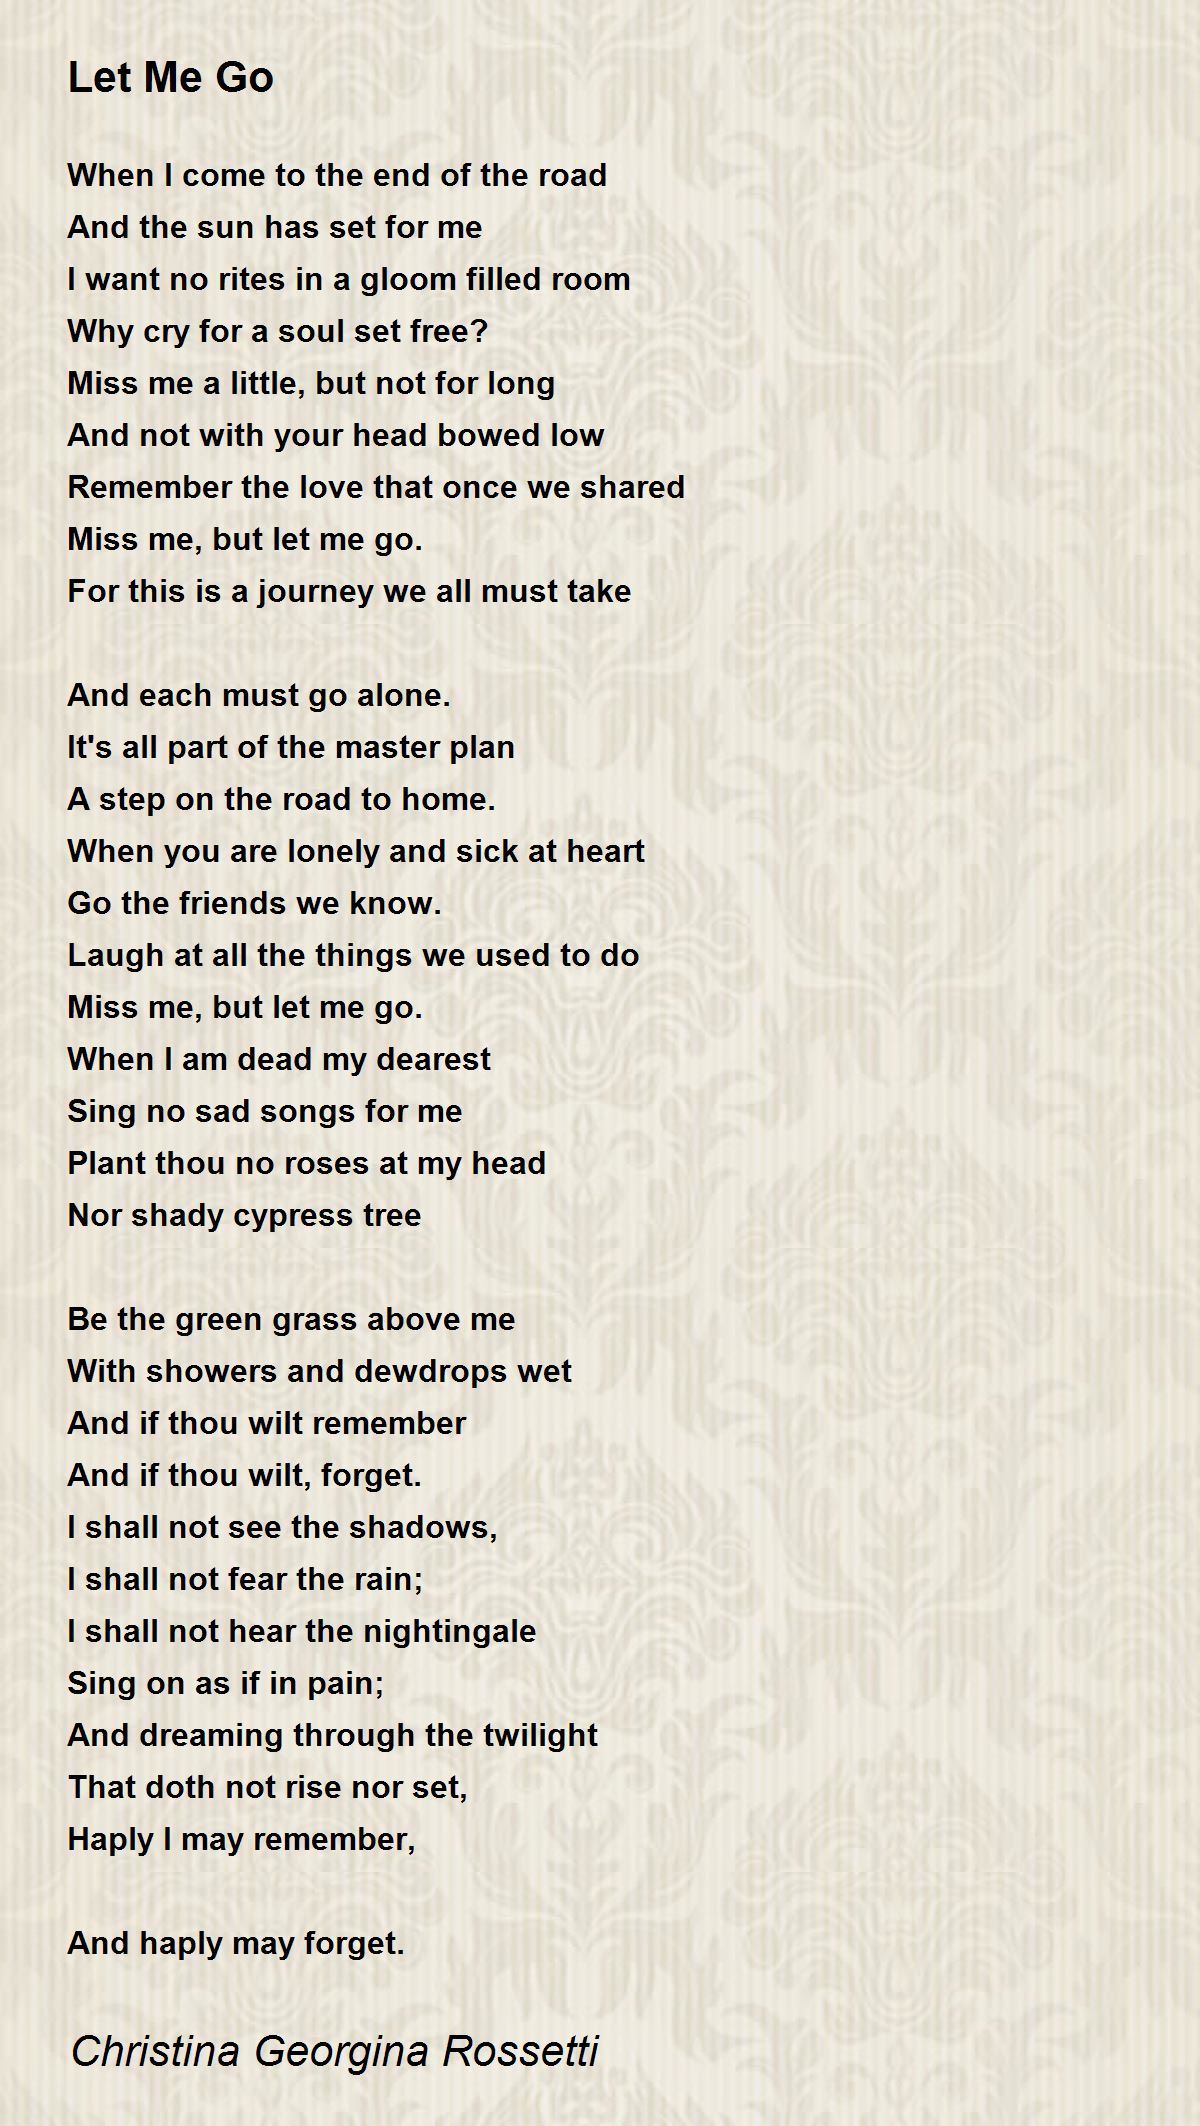 if thou must love me poem